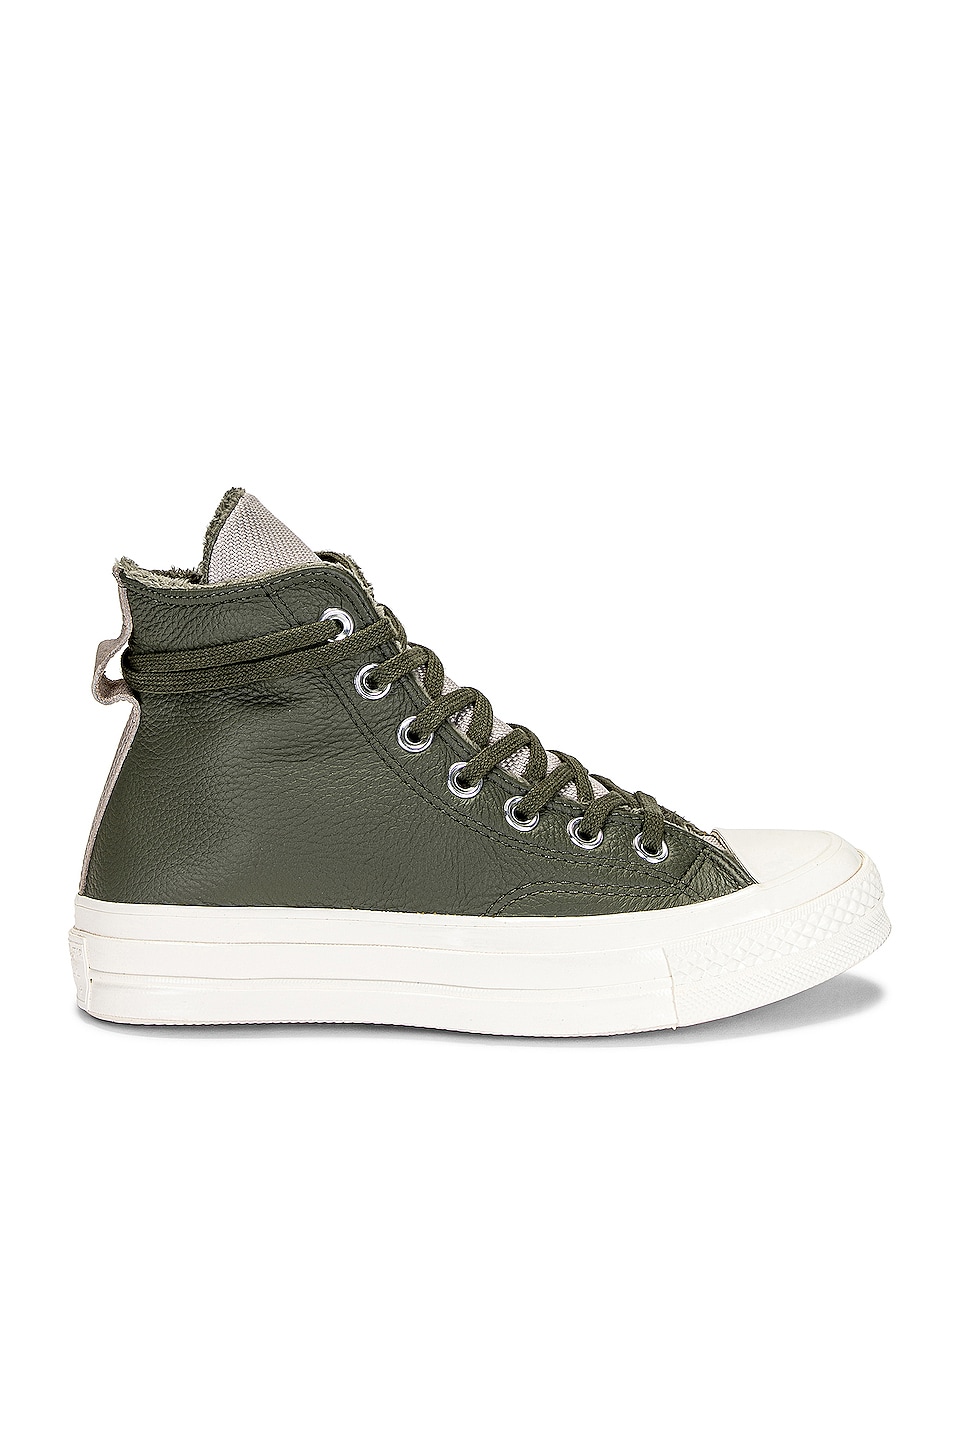 Converse Chuck 70 Counter Climate Sneaker in Utility, Papyrus, & Egret ...